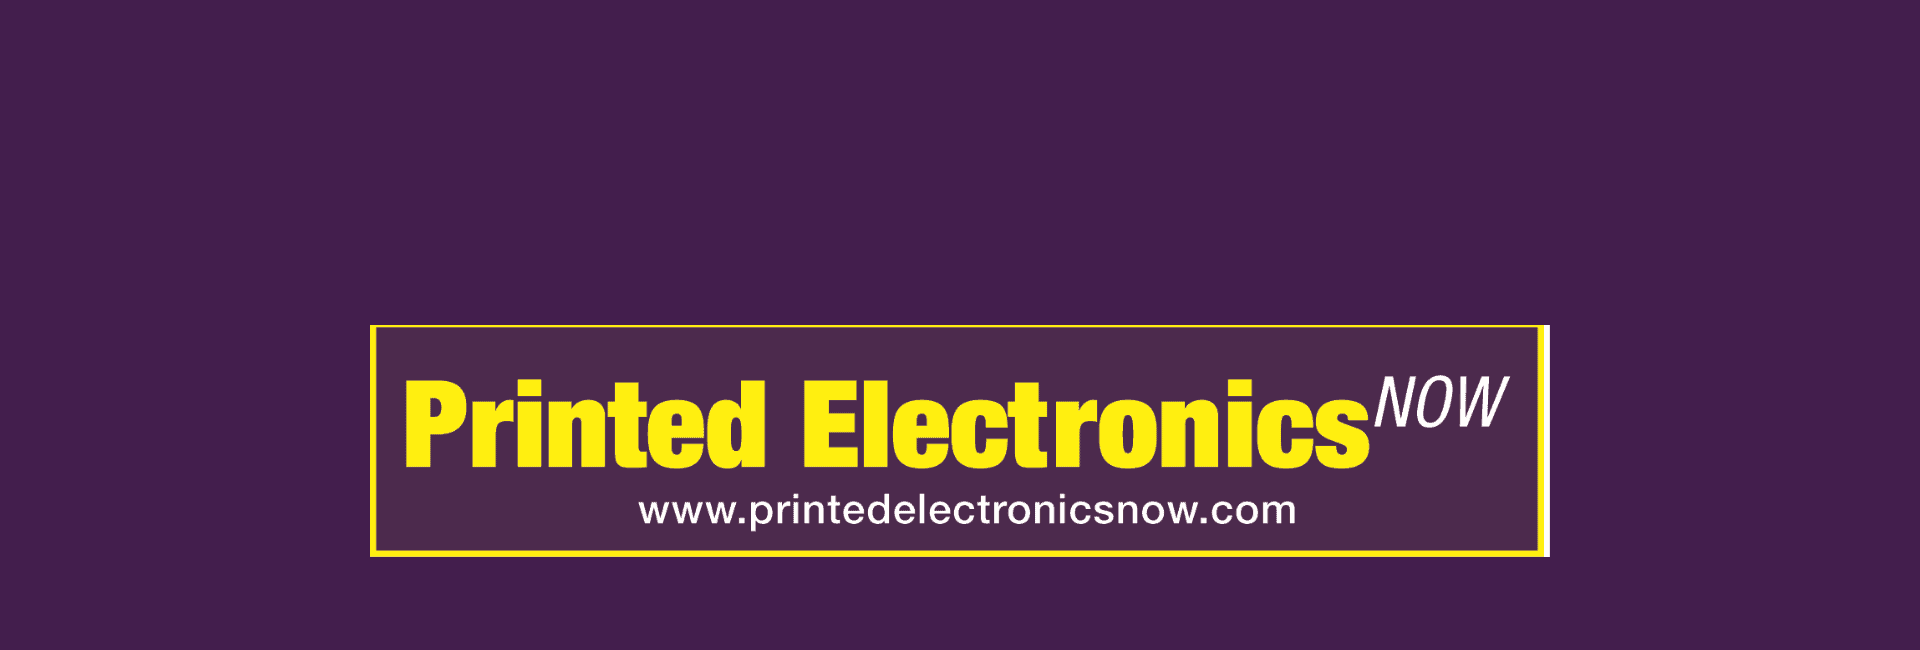 Printed Electronics Now - OLEDWorks Interview